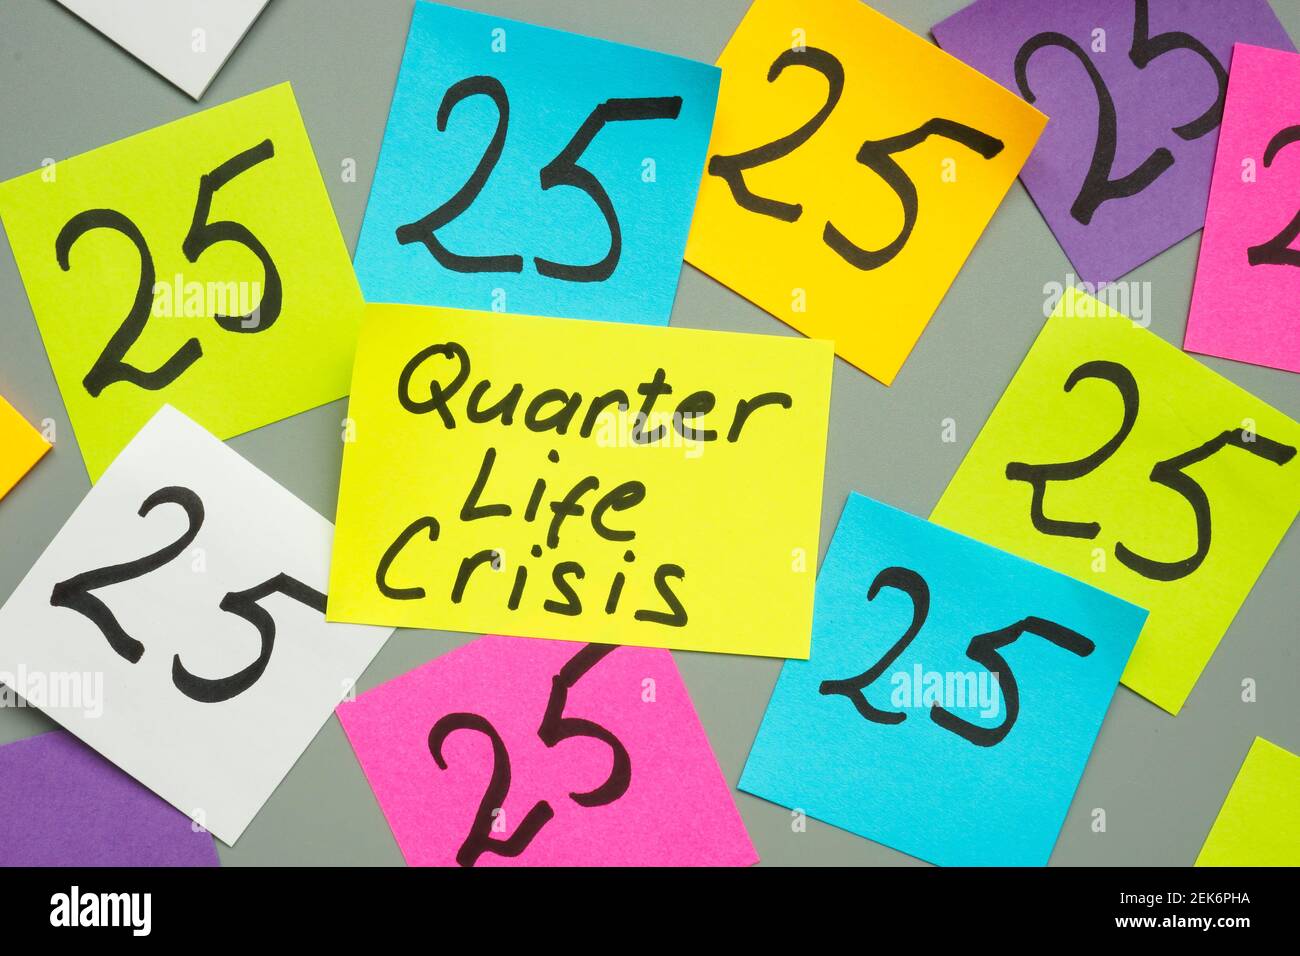 Quarter life crisis words and pieces of paper with 25. Stock Photo